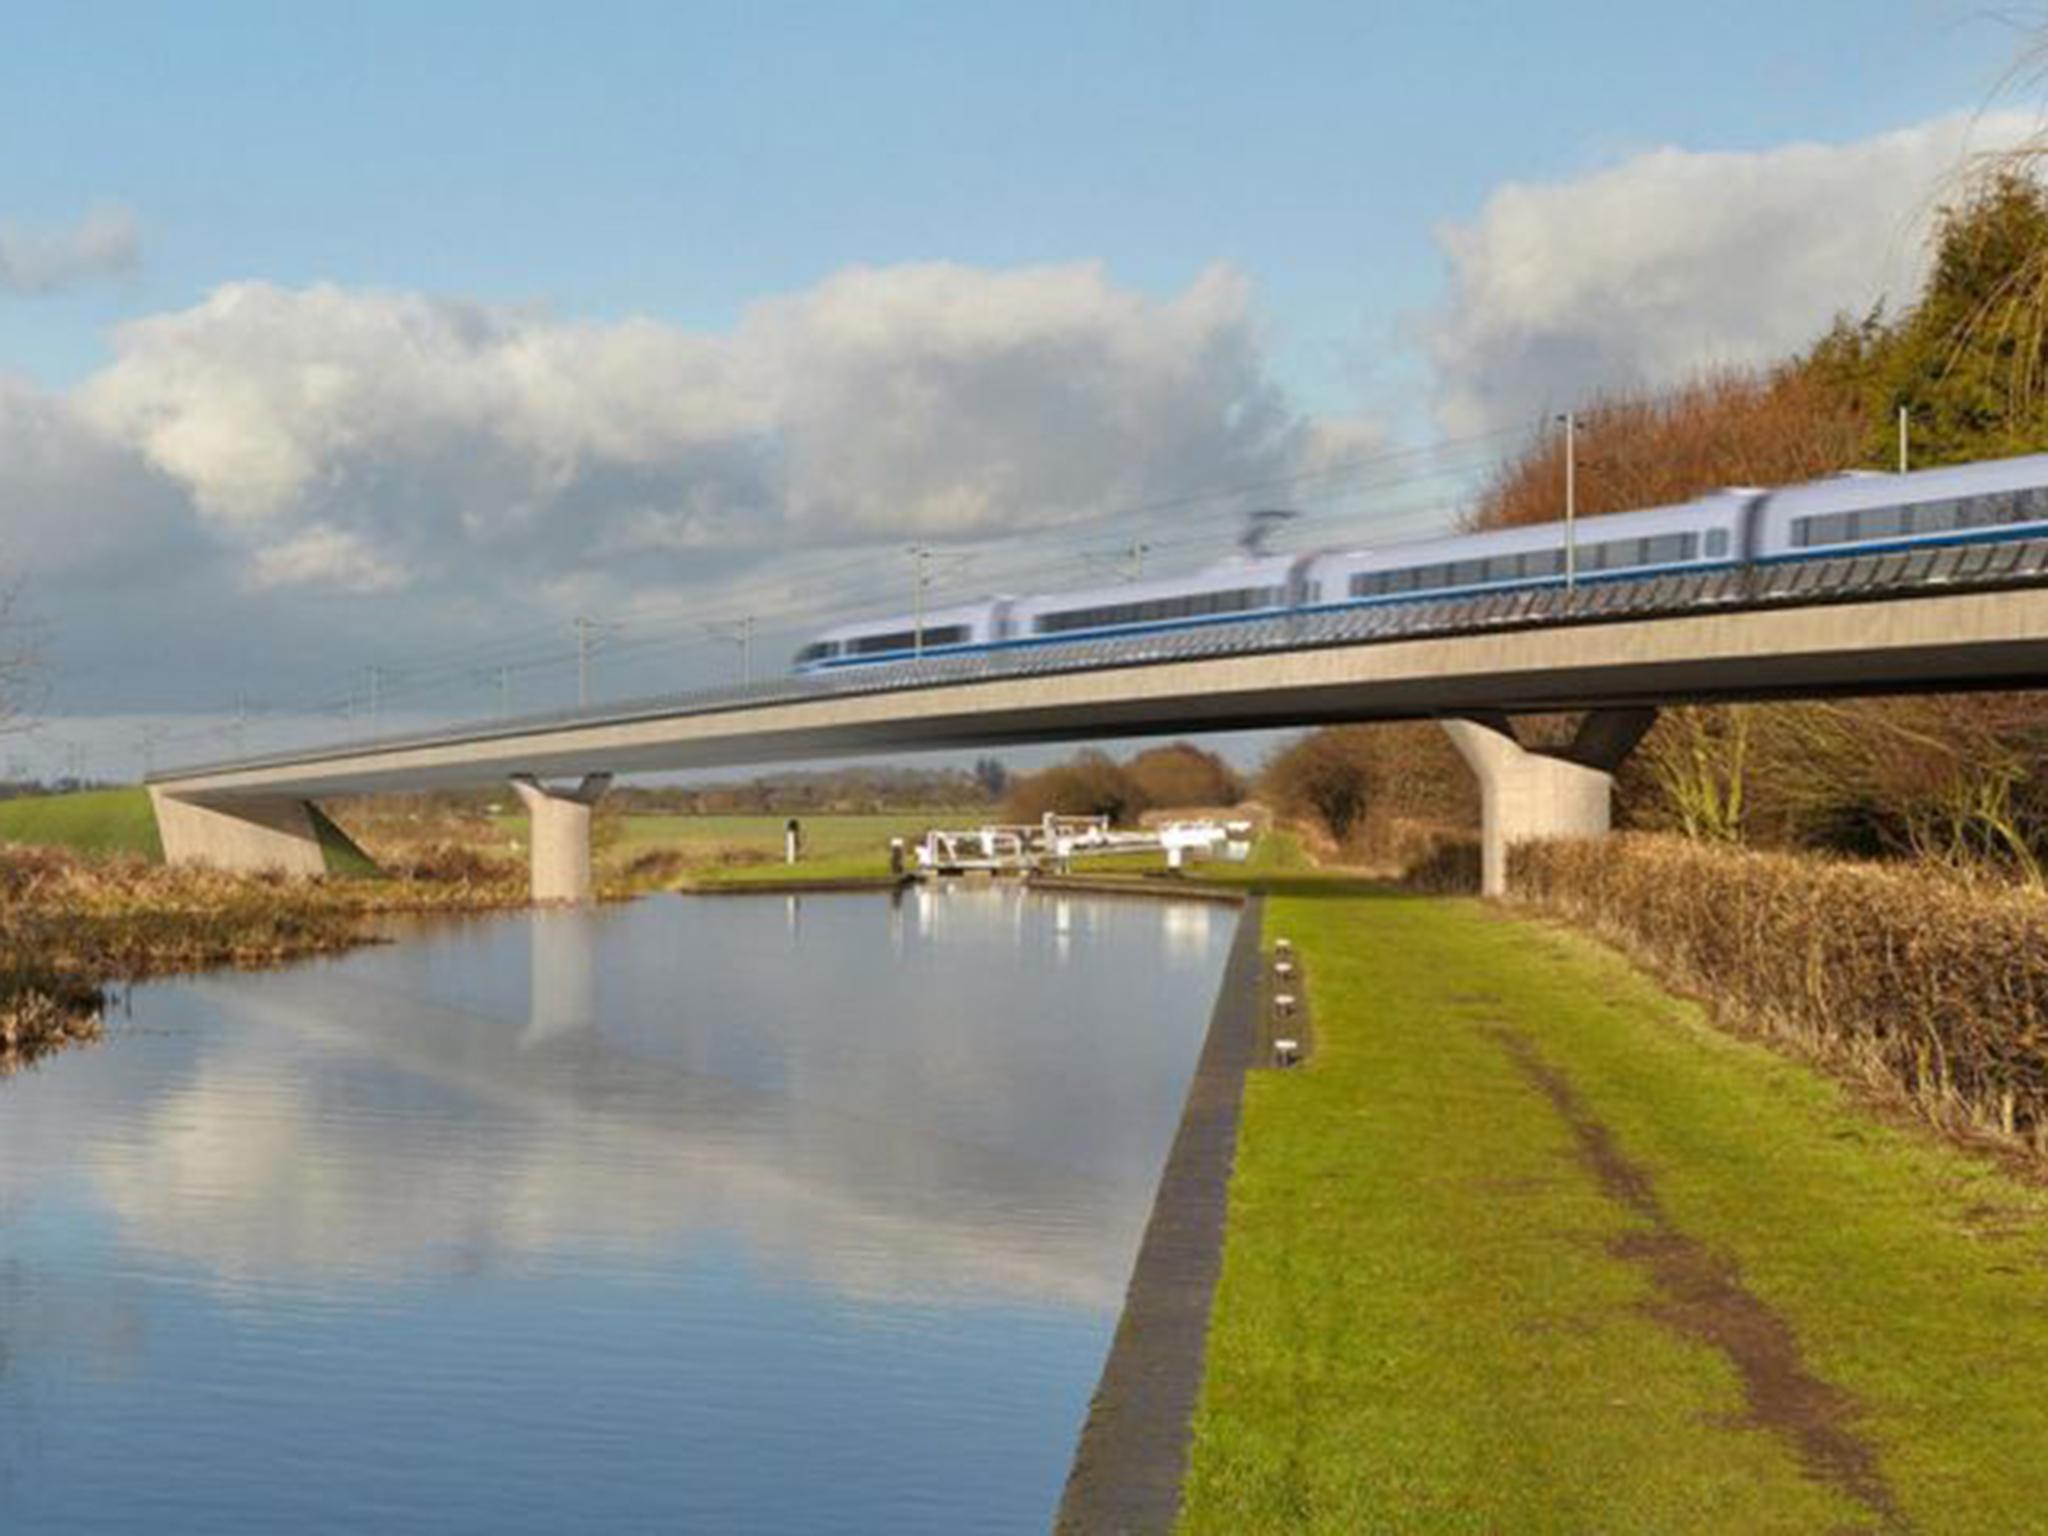 The Birmingham and Fazeley viaduct, part of the proposed High Speed Two rail scheme HS2